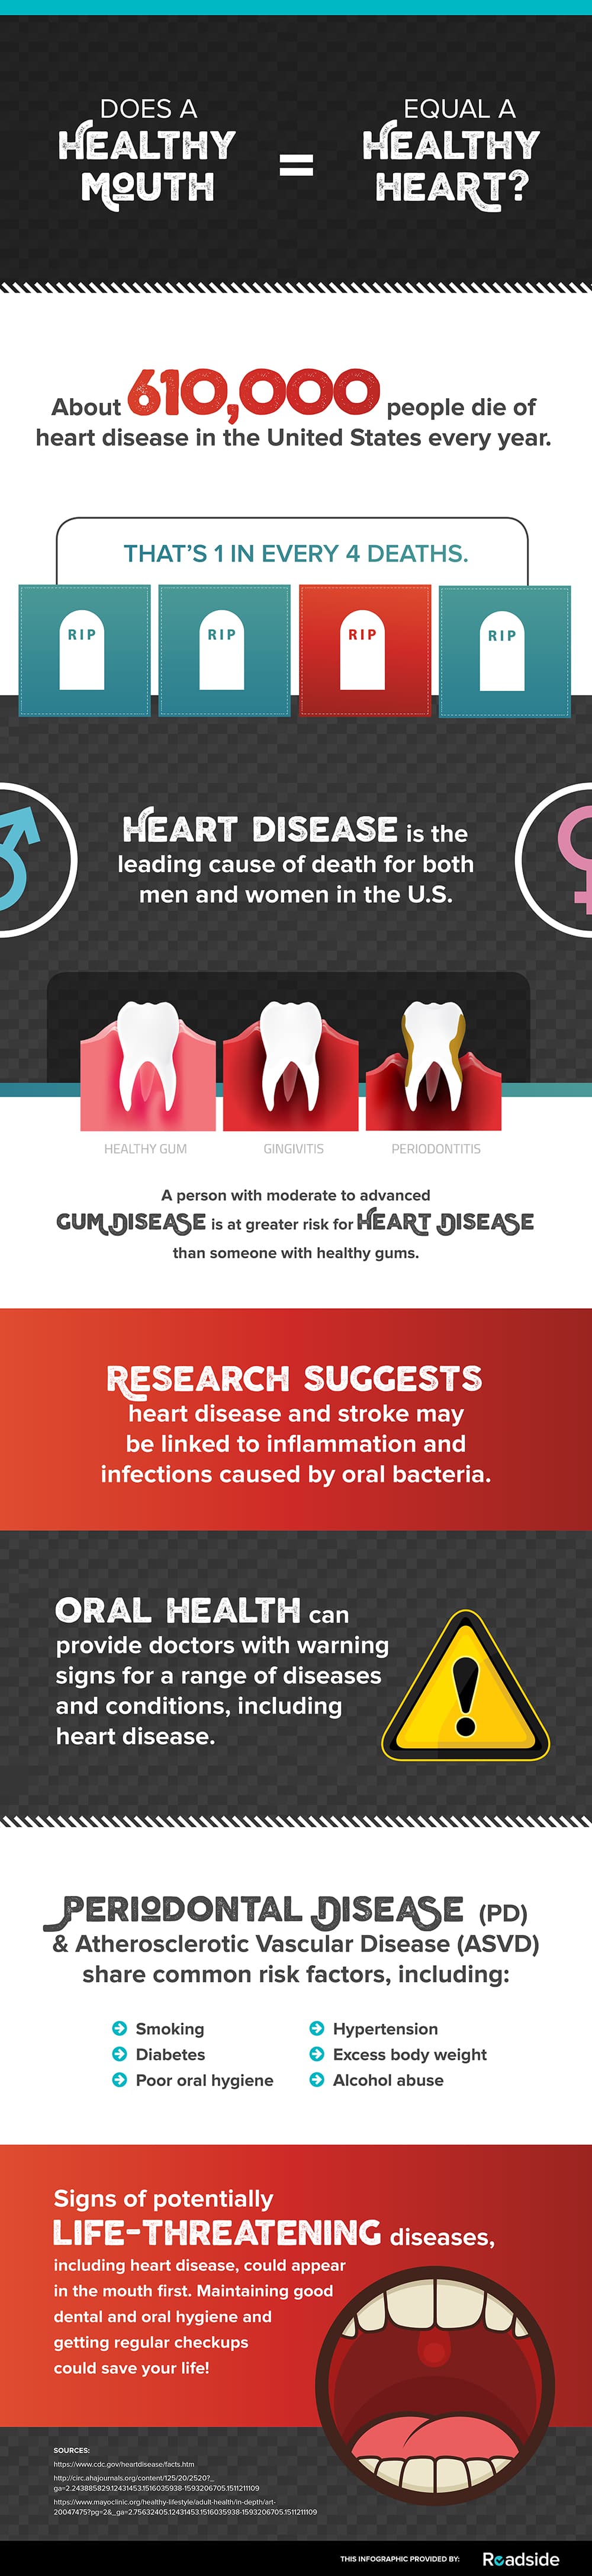 Healthy mouth - healthy heart, infographic